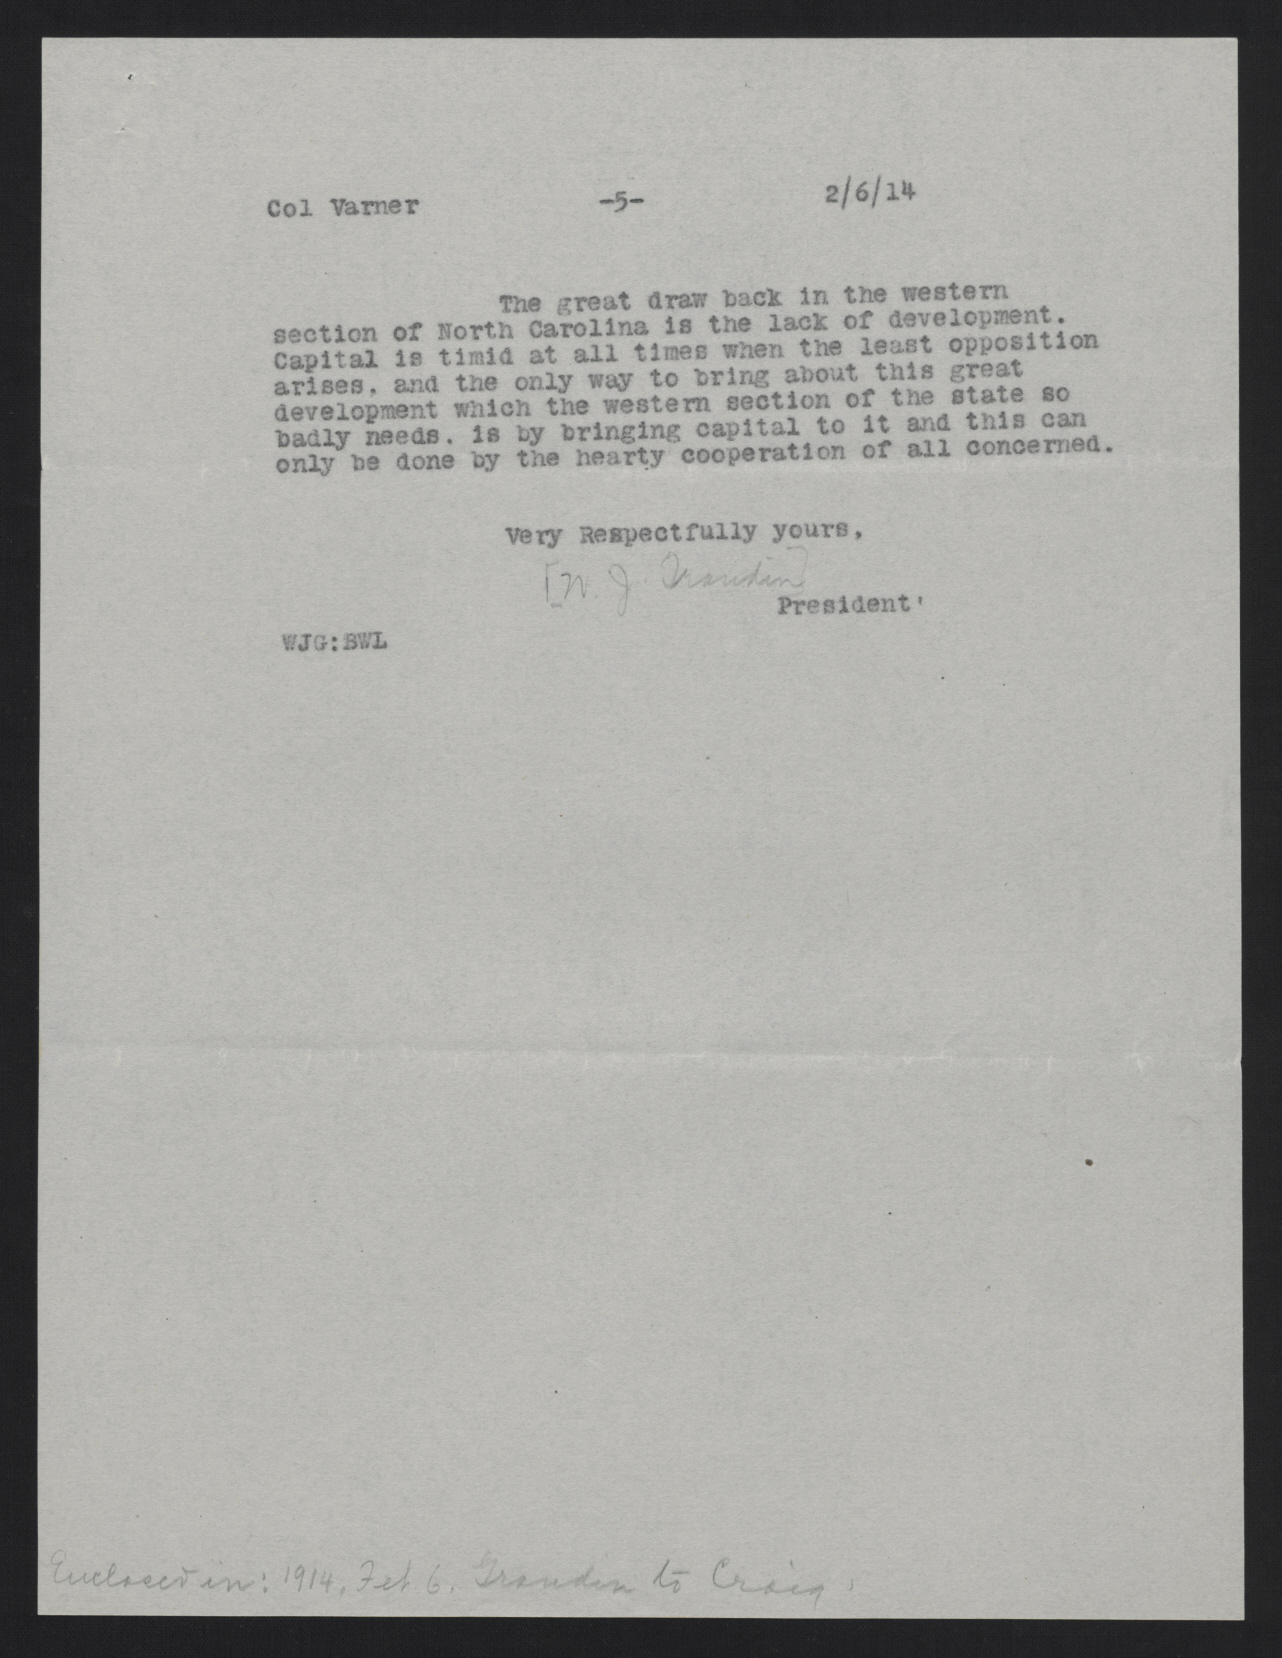 Letter from Grandin to Varner, February 6, 1914, page 5